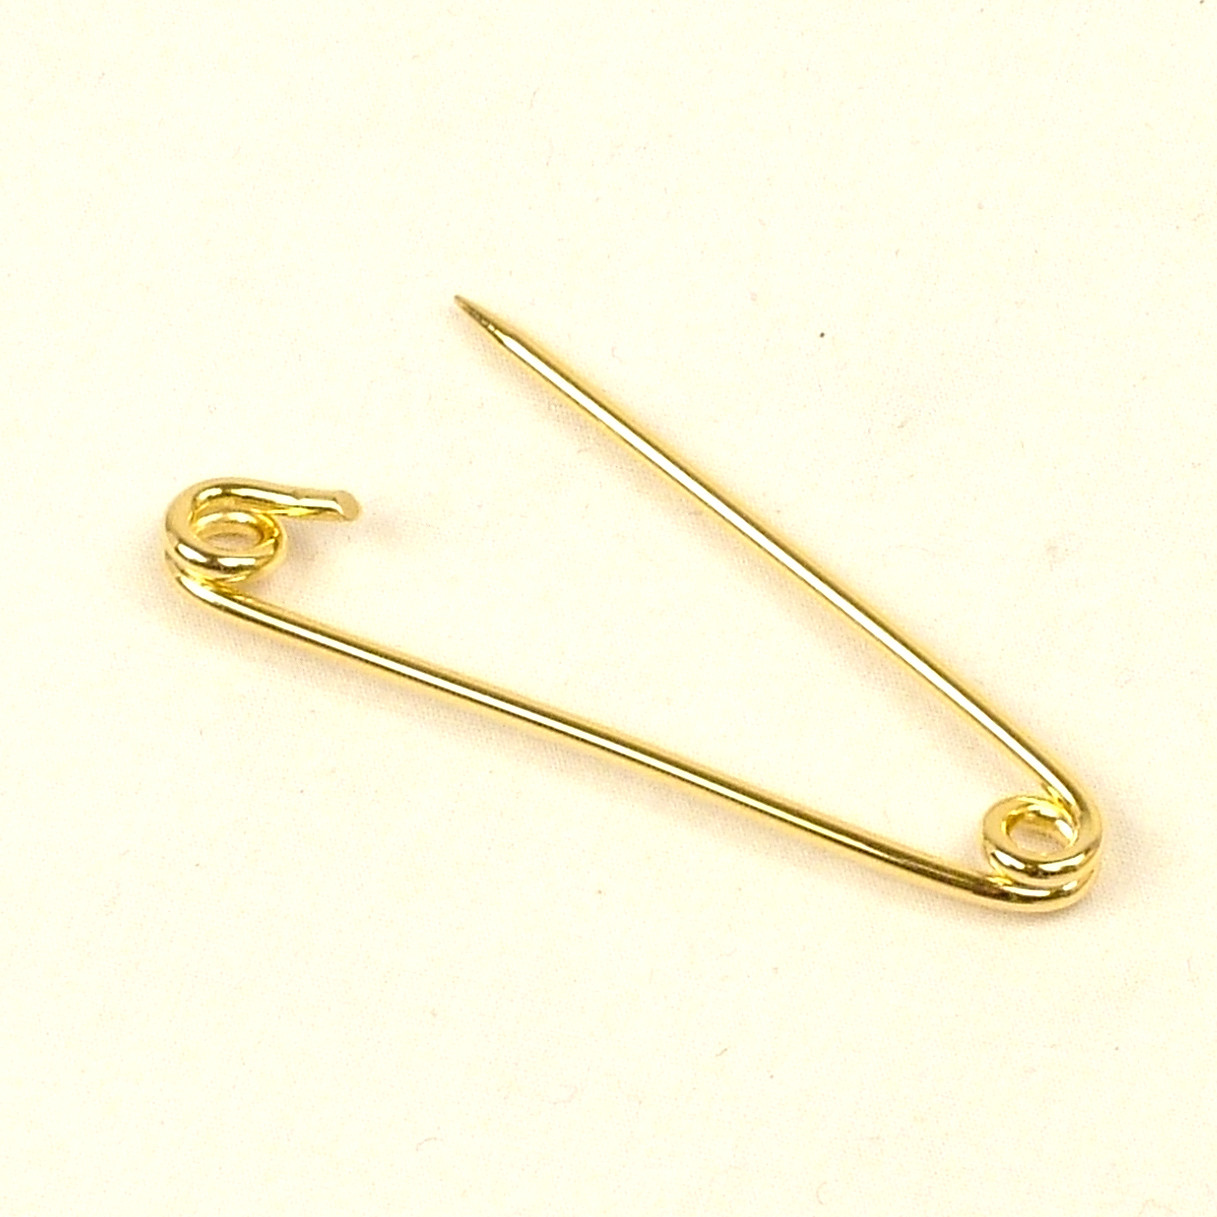 Safety Pins
 Gold collar safety pin which can be used to pierce the collar